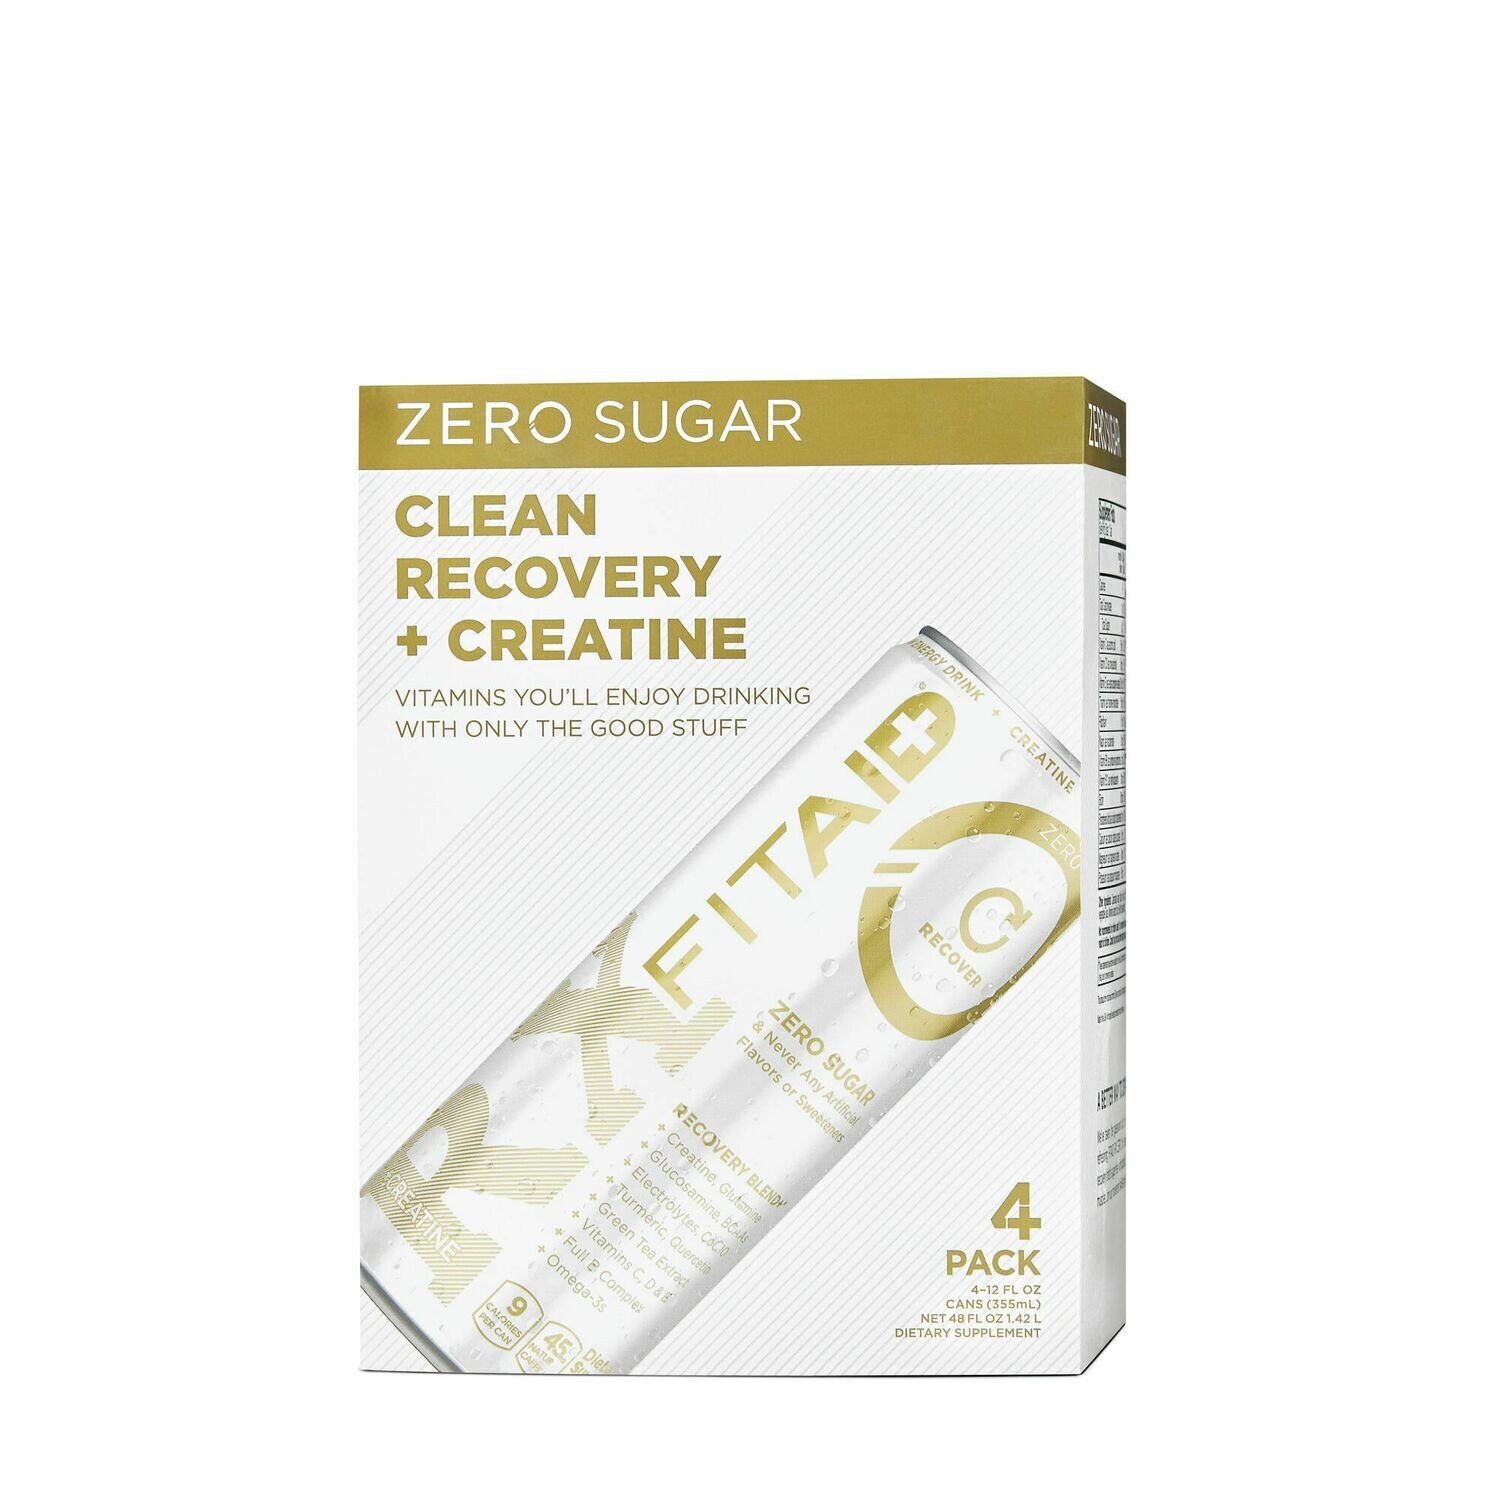 Beverage / supplement / Lifeaid Fitaid RX Recovery Zero Sugar, 4pk